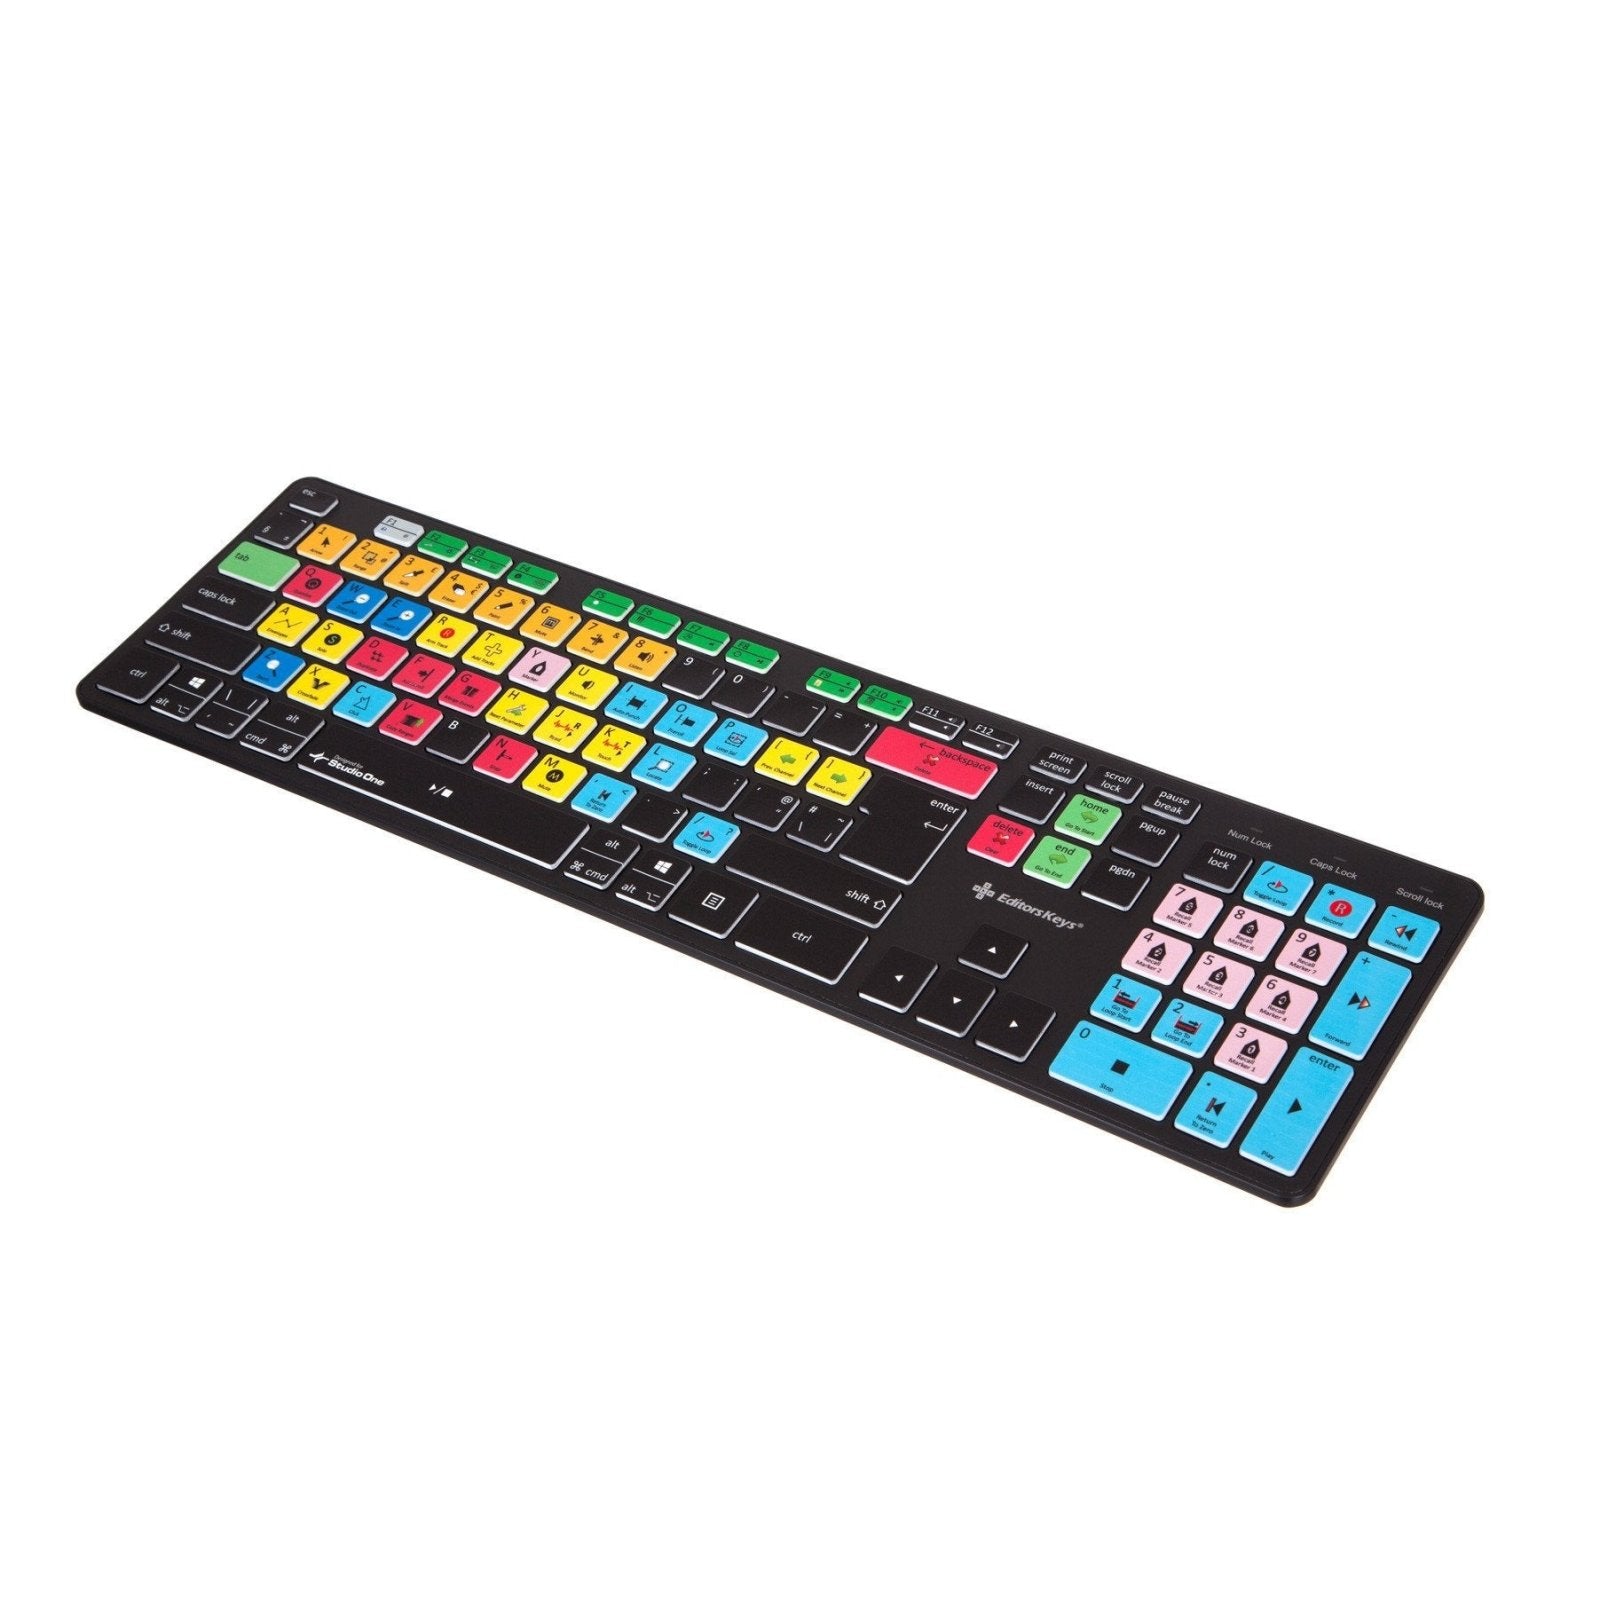 Presonus Studio One Keyboard - Available as USB Wired or Wireless